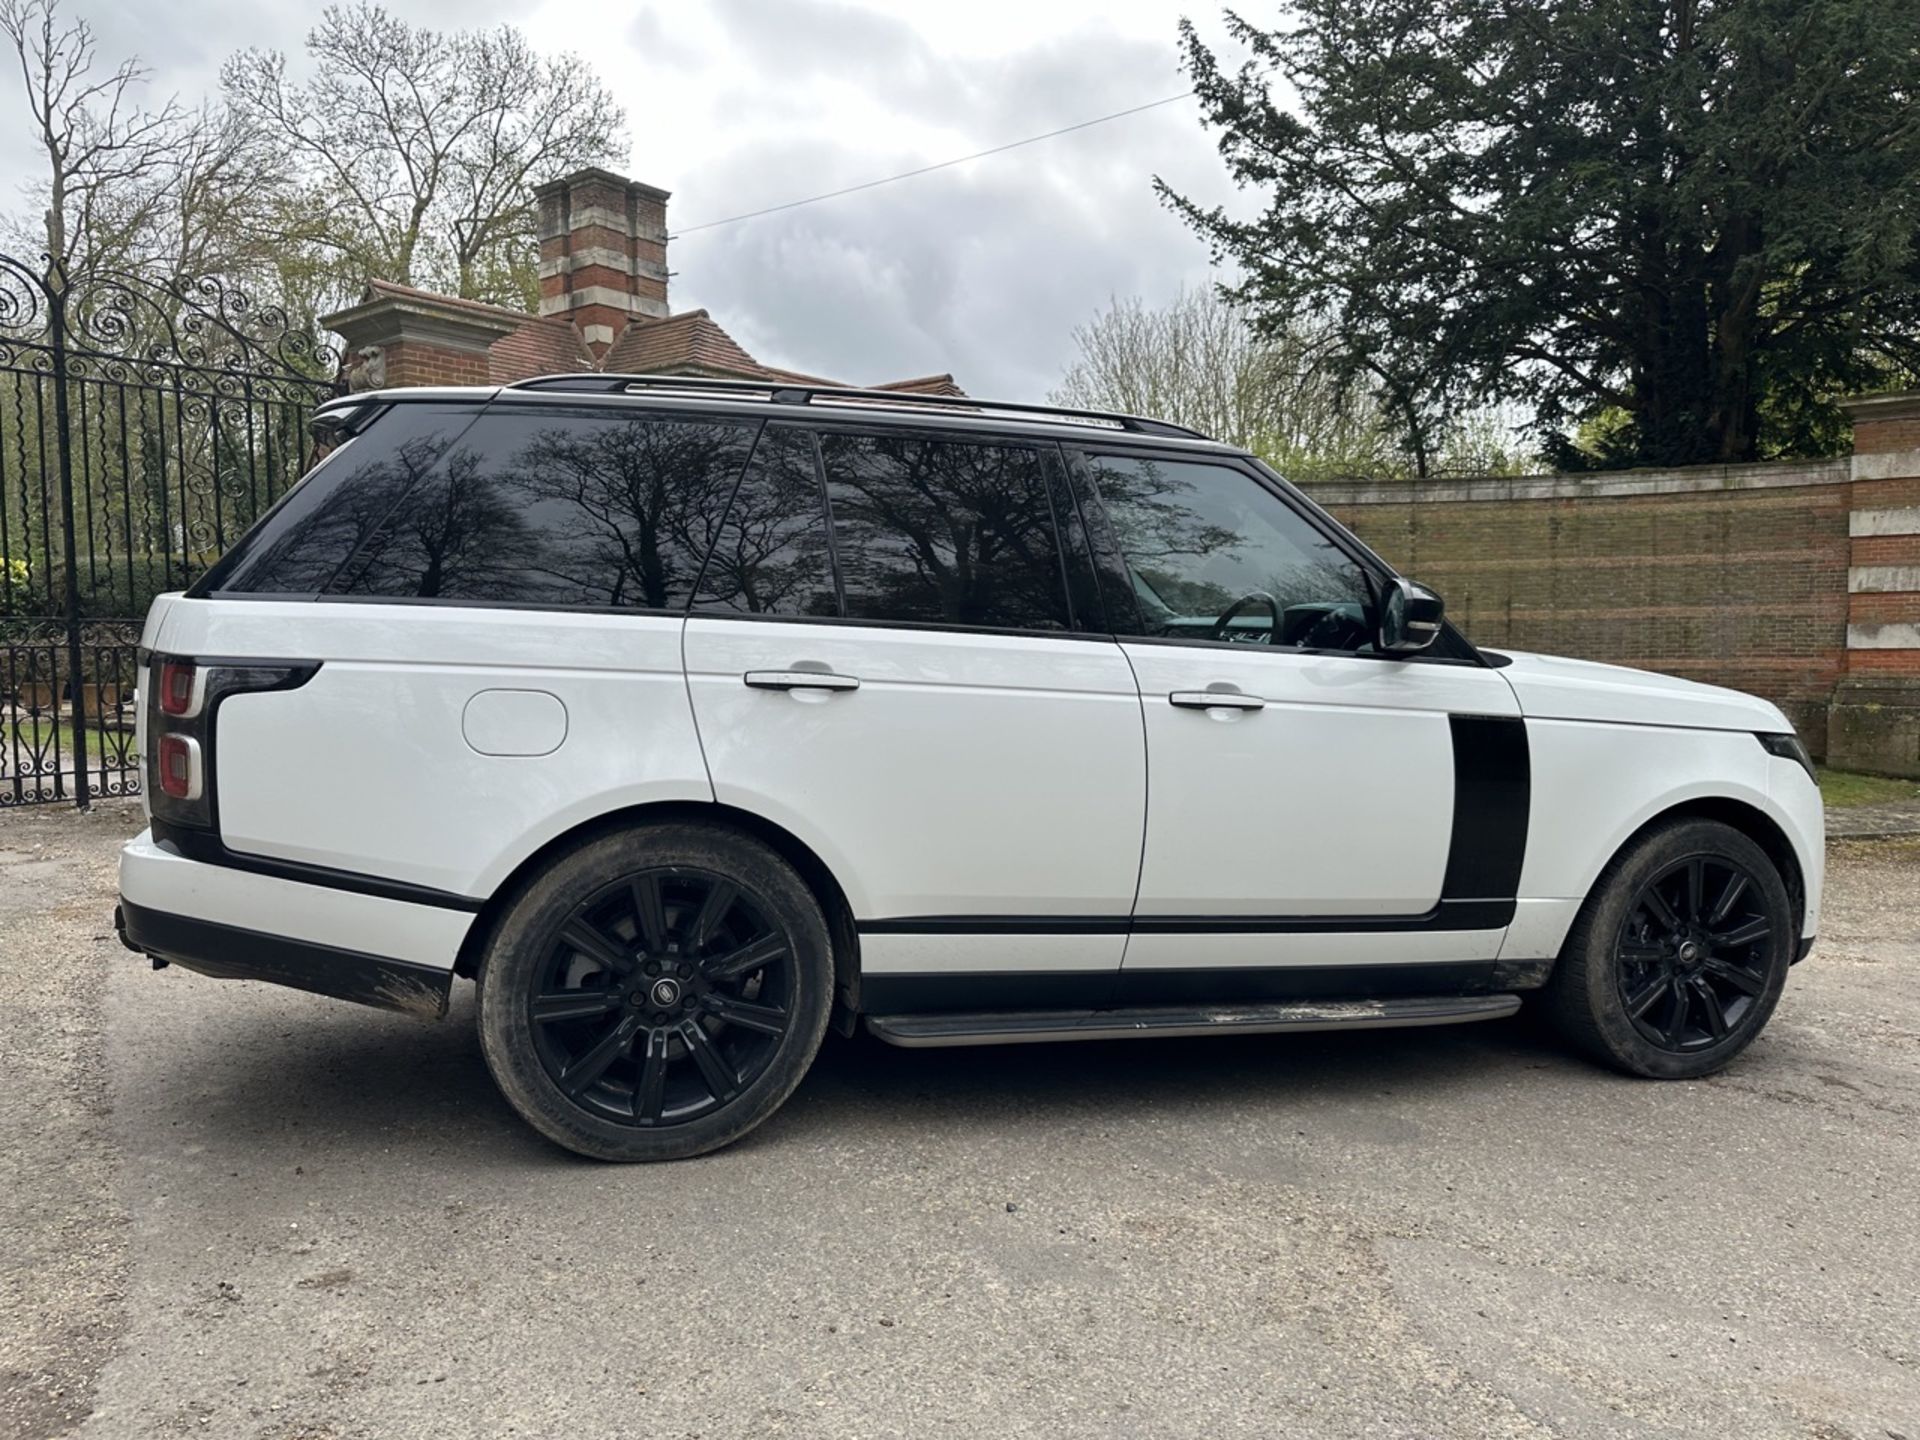 LAND ROVER RANGE ROVER 2.0 P400e Autobiography 4dr Auto - Automatic - 2018 - 31k miles - FULL SH - Image 9 of 17